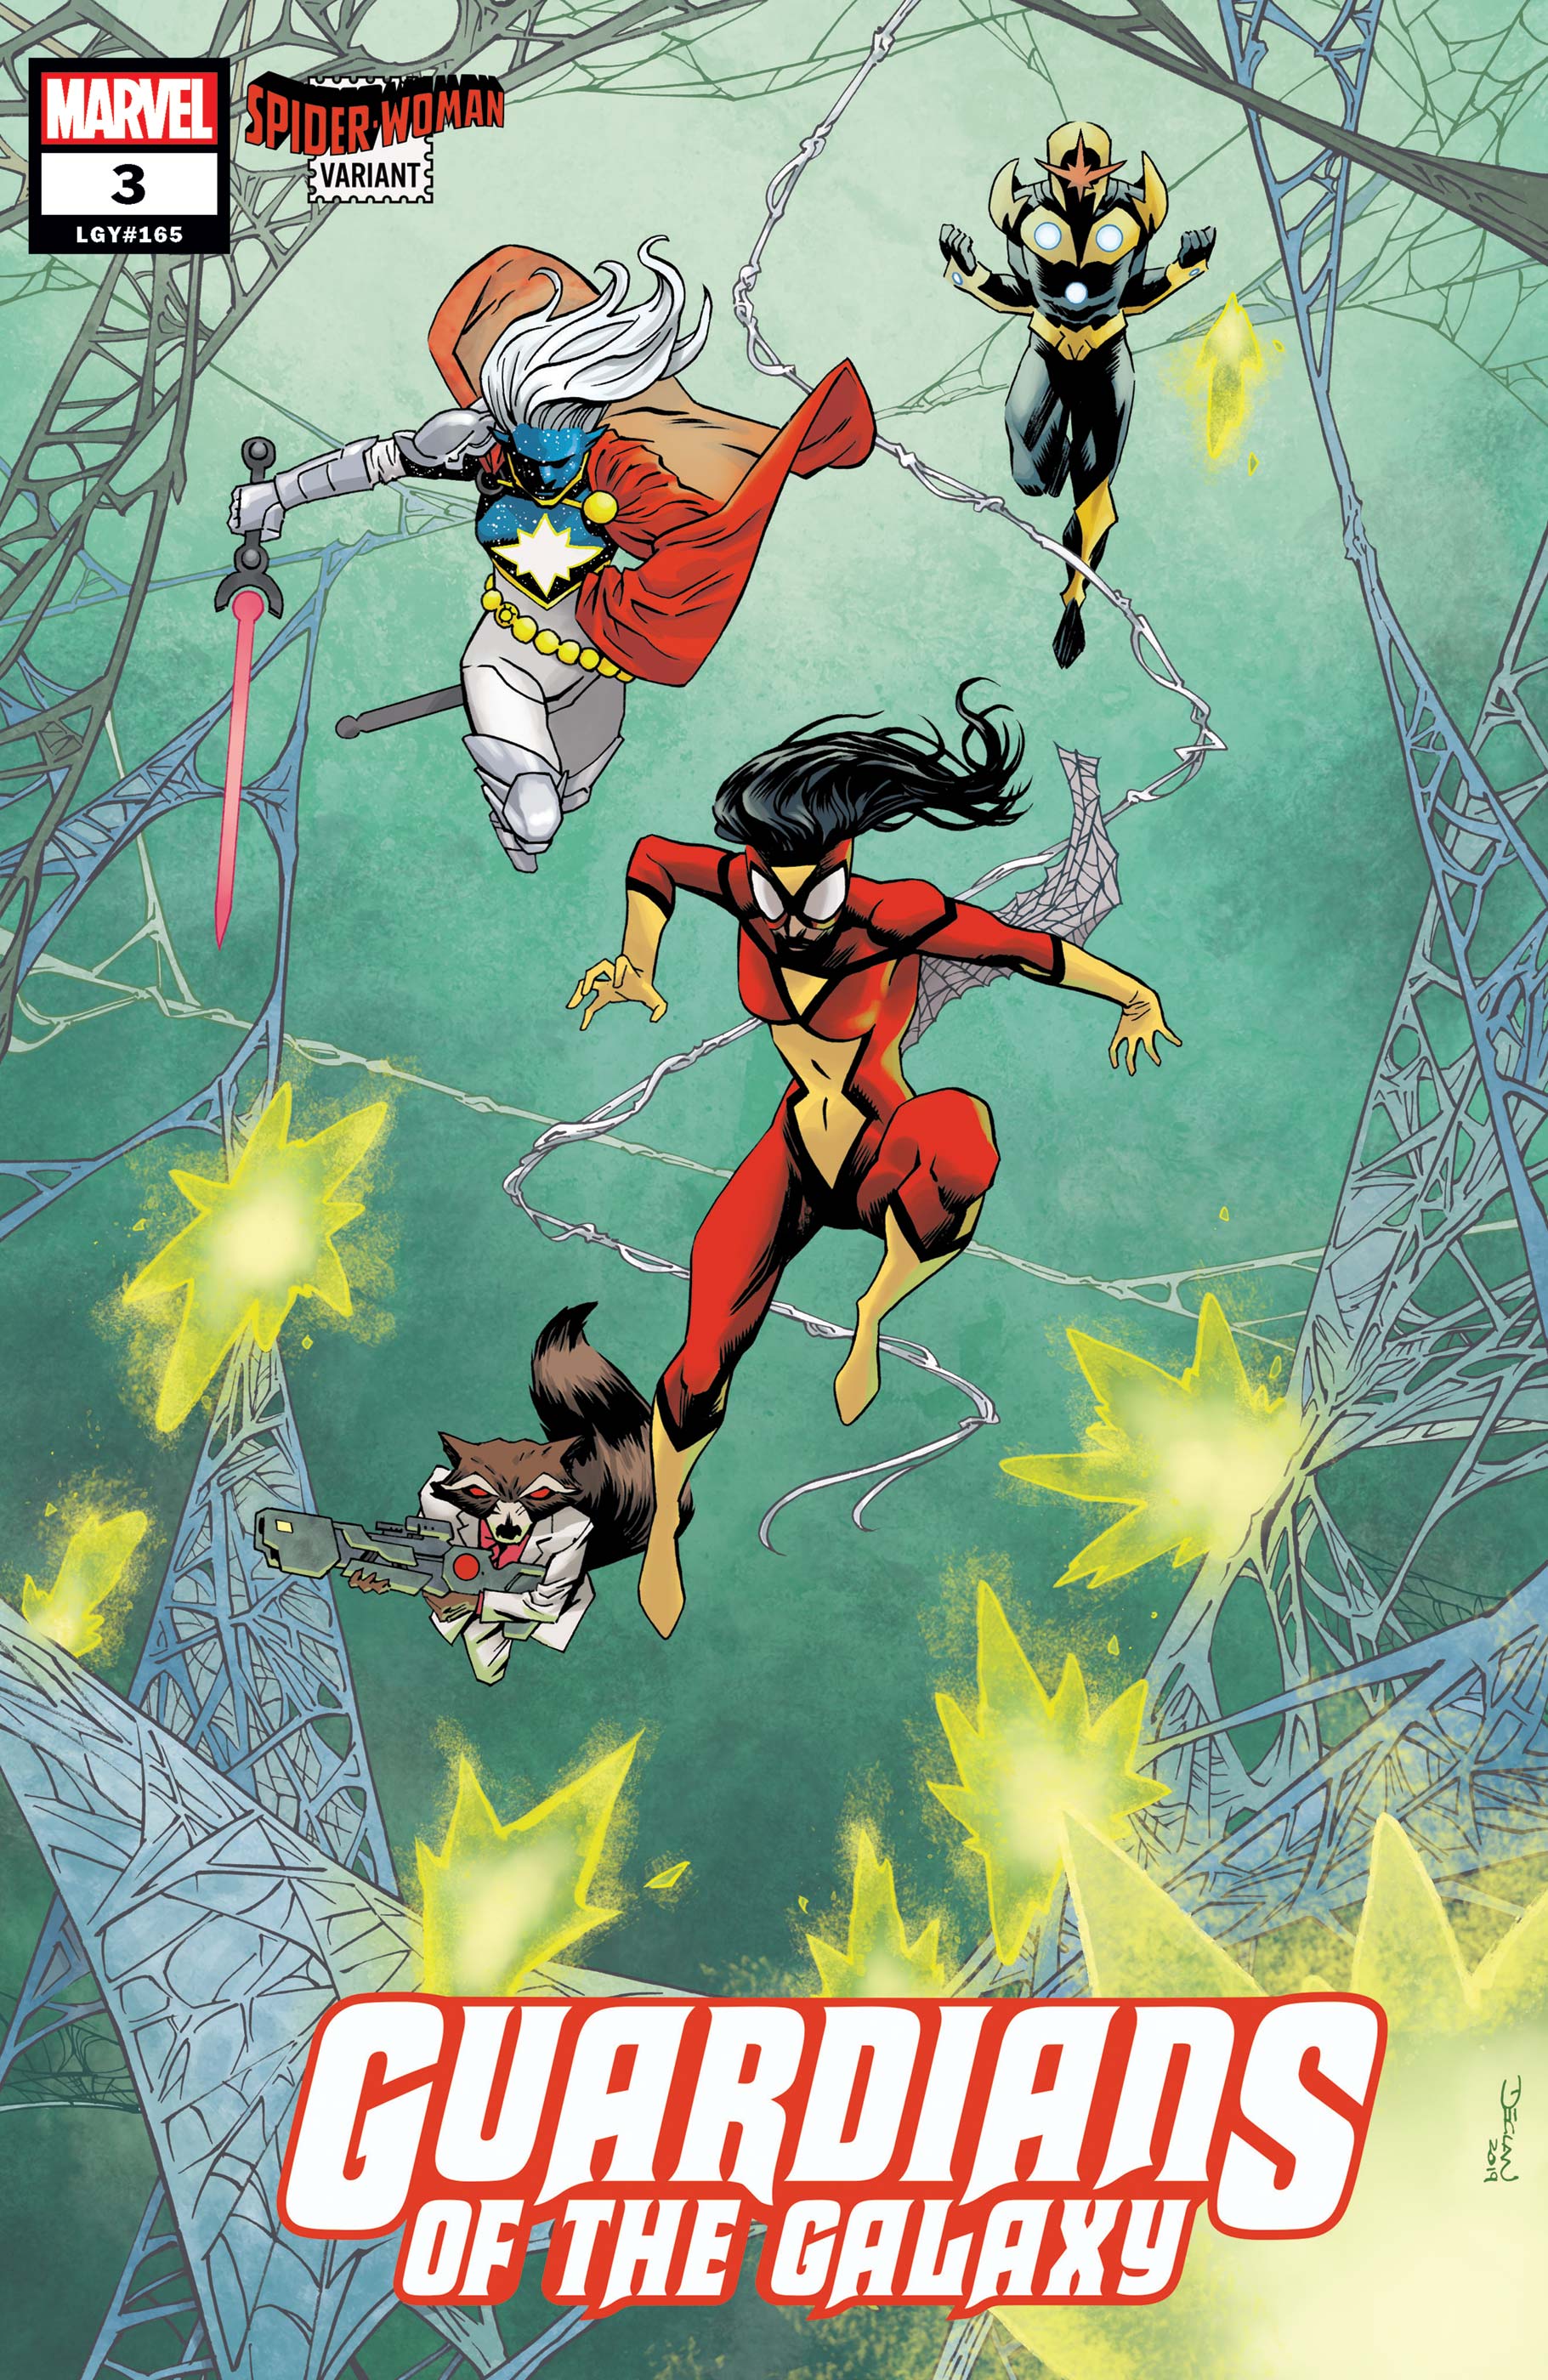 Guardians of the Galaxy #3 Shalvey Spider-Woman Variant (2020)